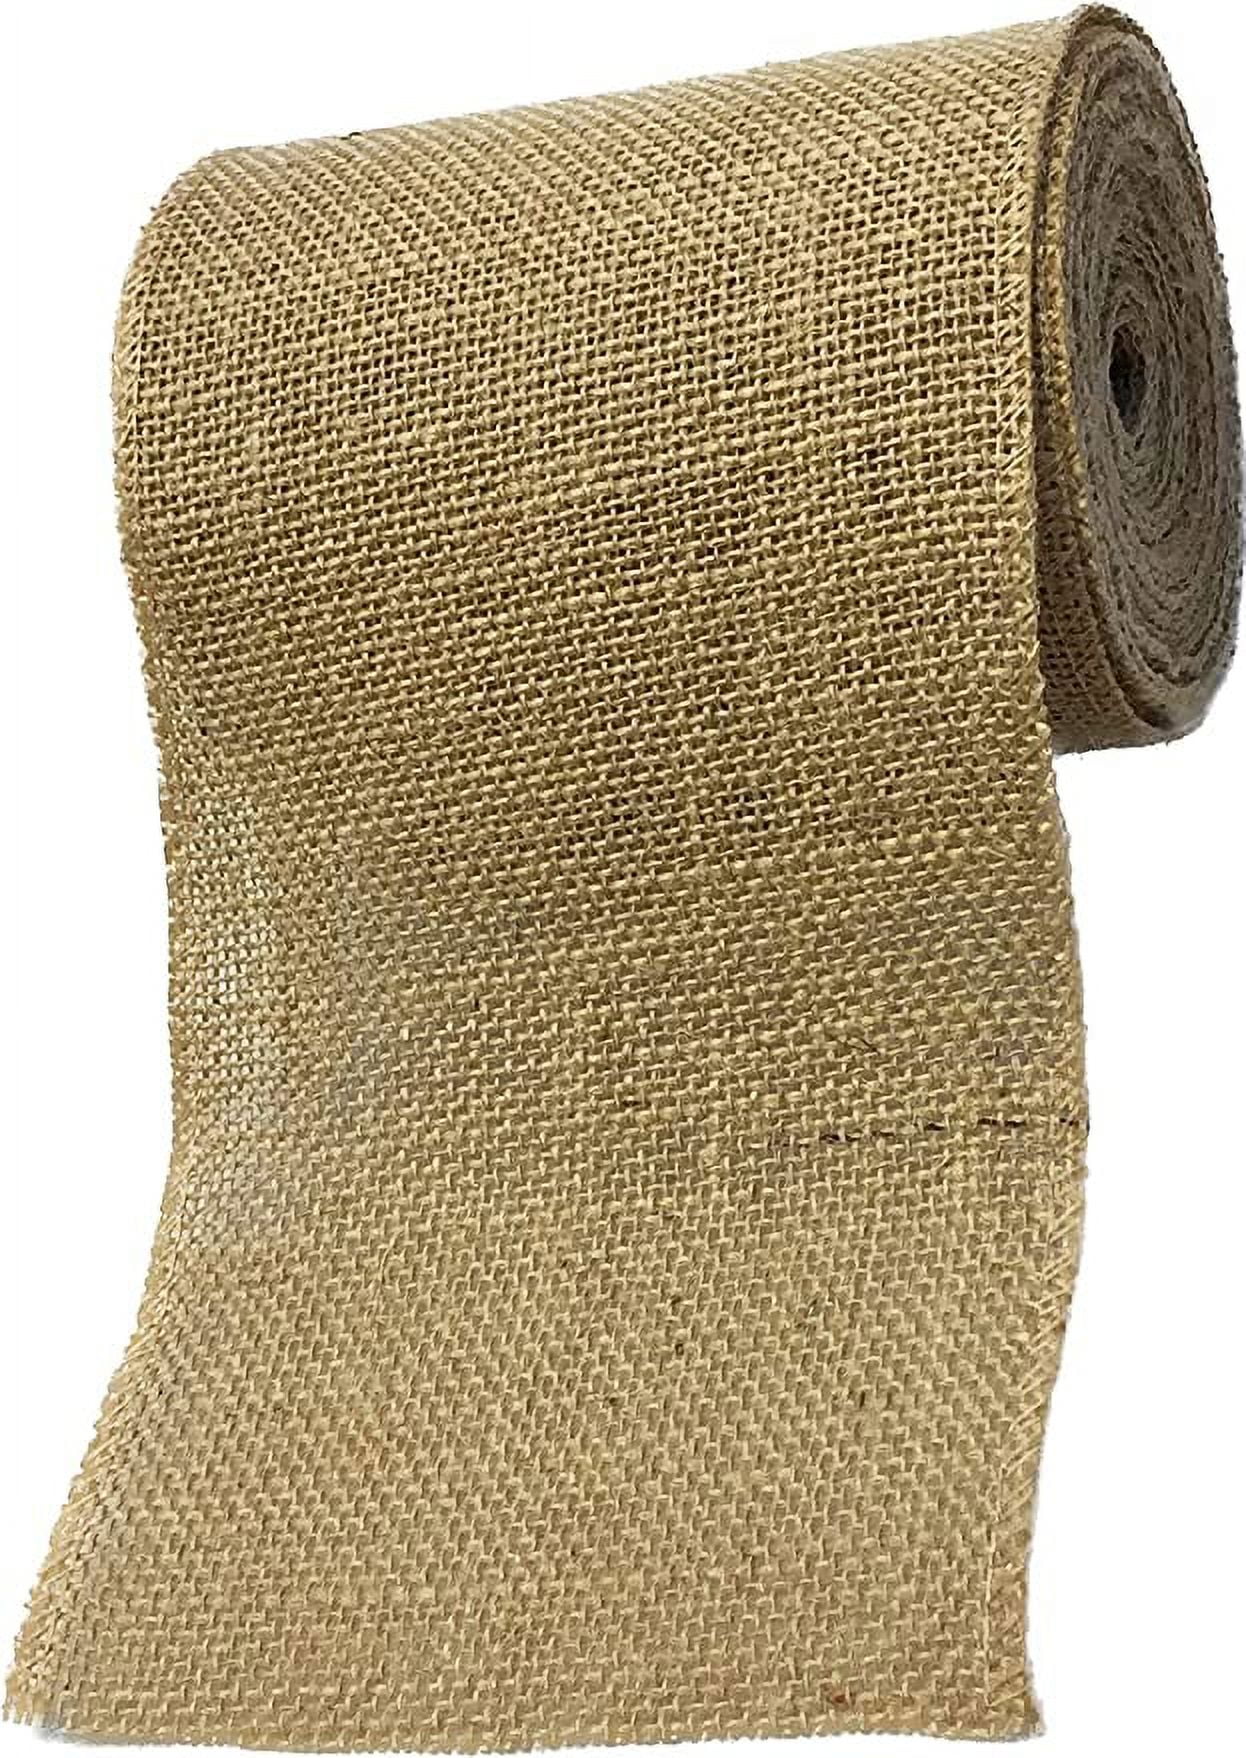 3-Pack Burlap Fabric Ribbon Natural Roll DIY (6inch x 15yards) Tree Protector Wrap Plant Bandage Packing Winter Proof, Craft & Hobby Fabric, Warm